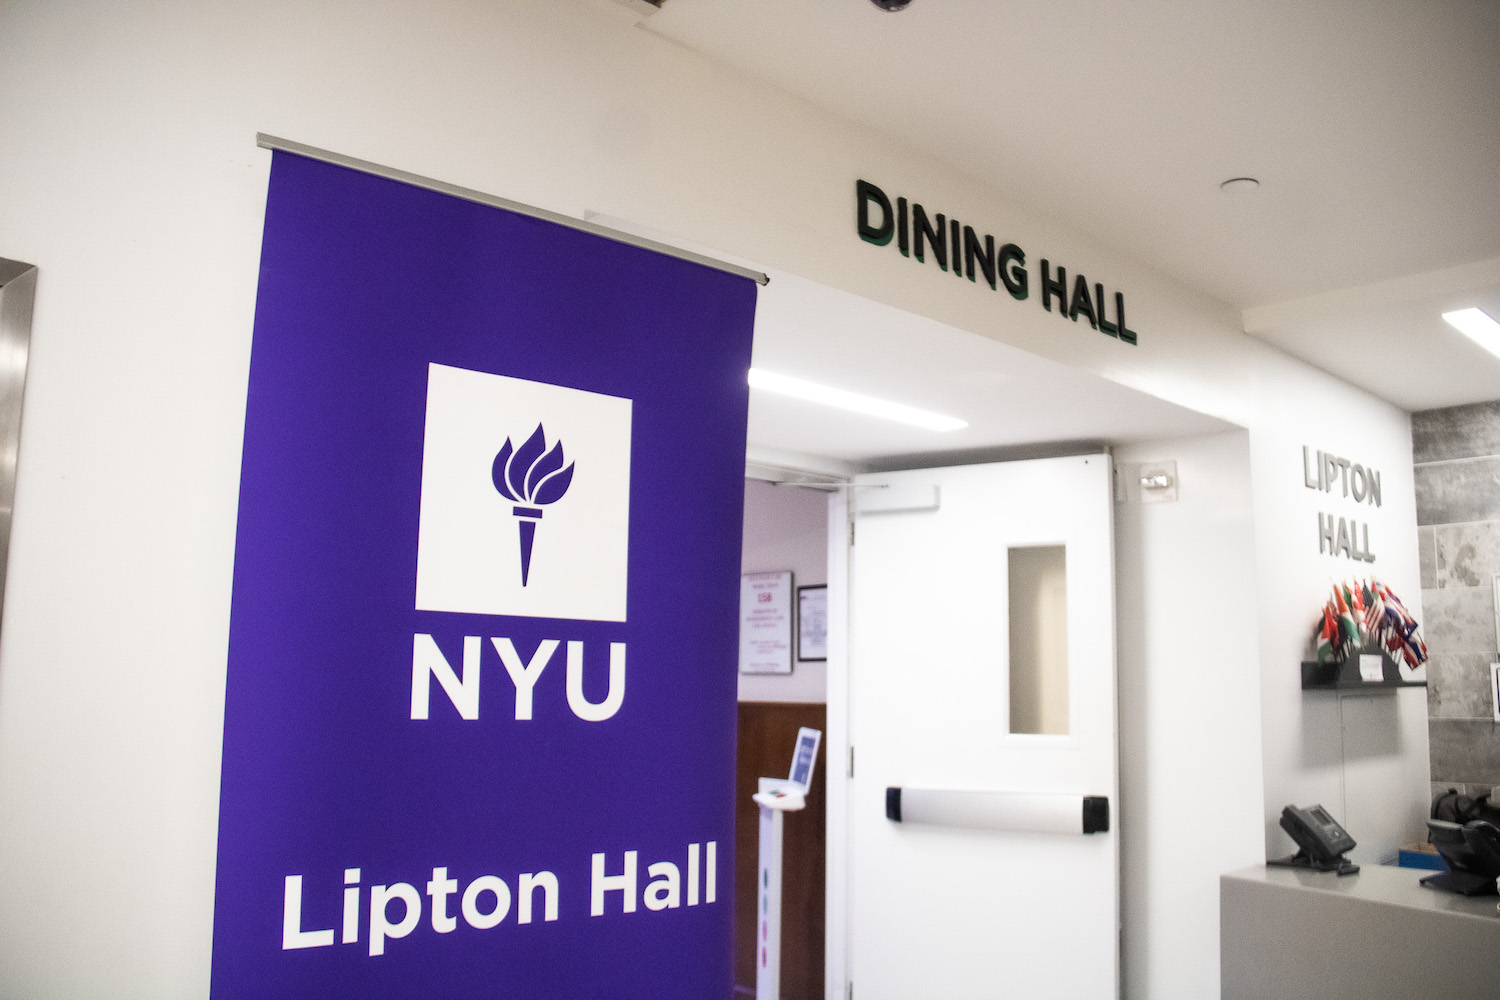 The exterior of Lipton dining hall, with "Dining Hall" at the top of the entrance and a sign on the left reading "N.Y.U. Lipton Hall.”